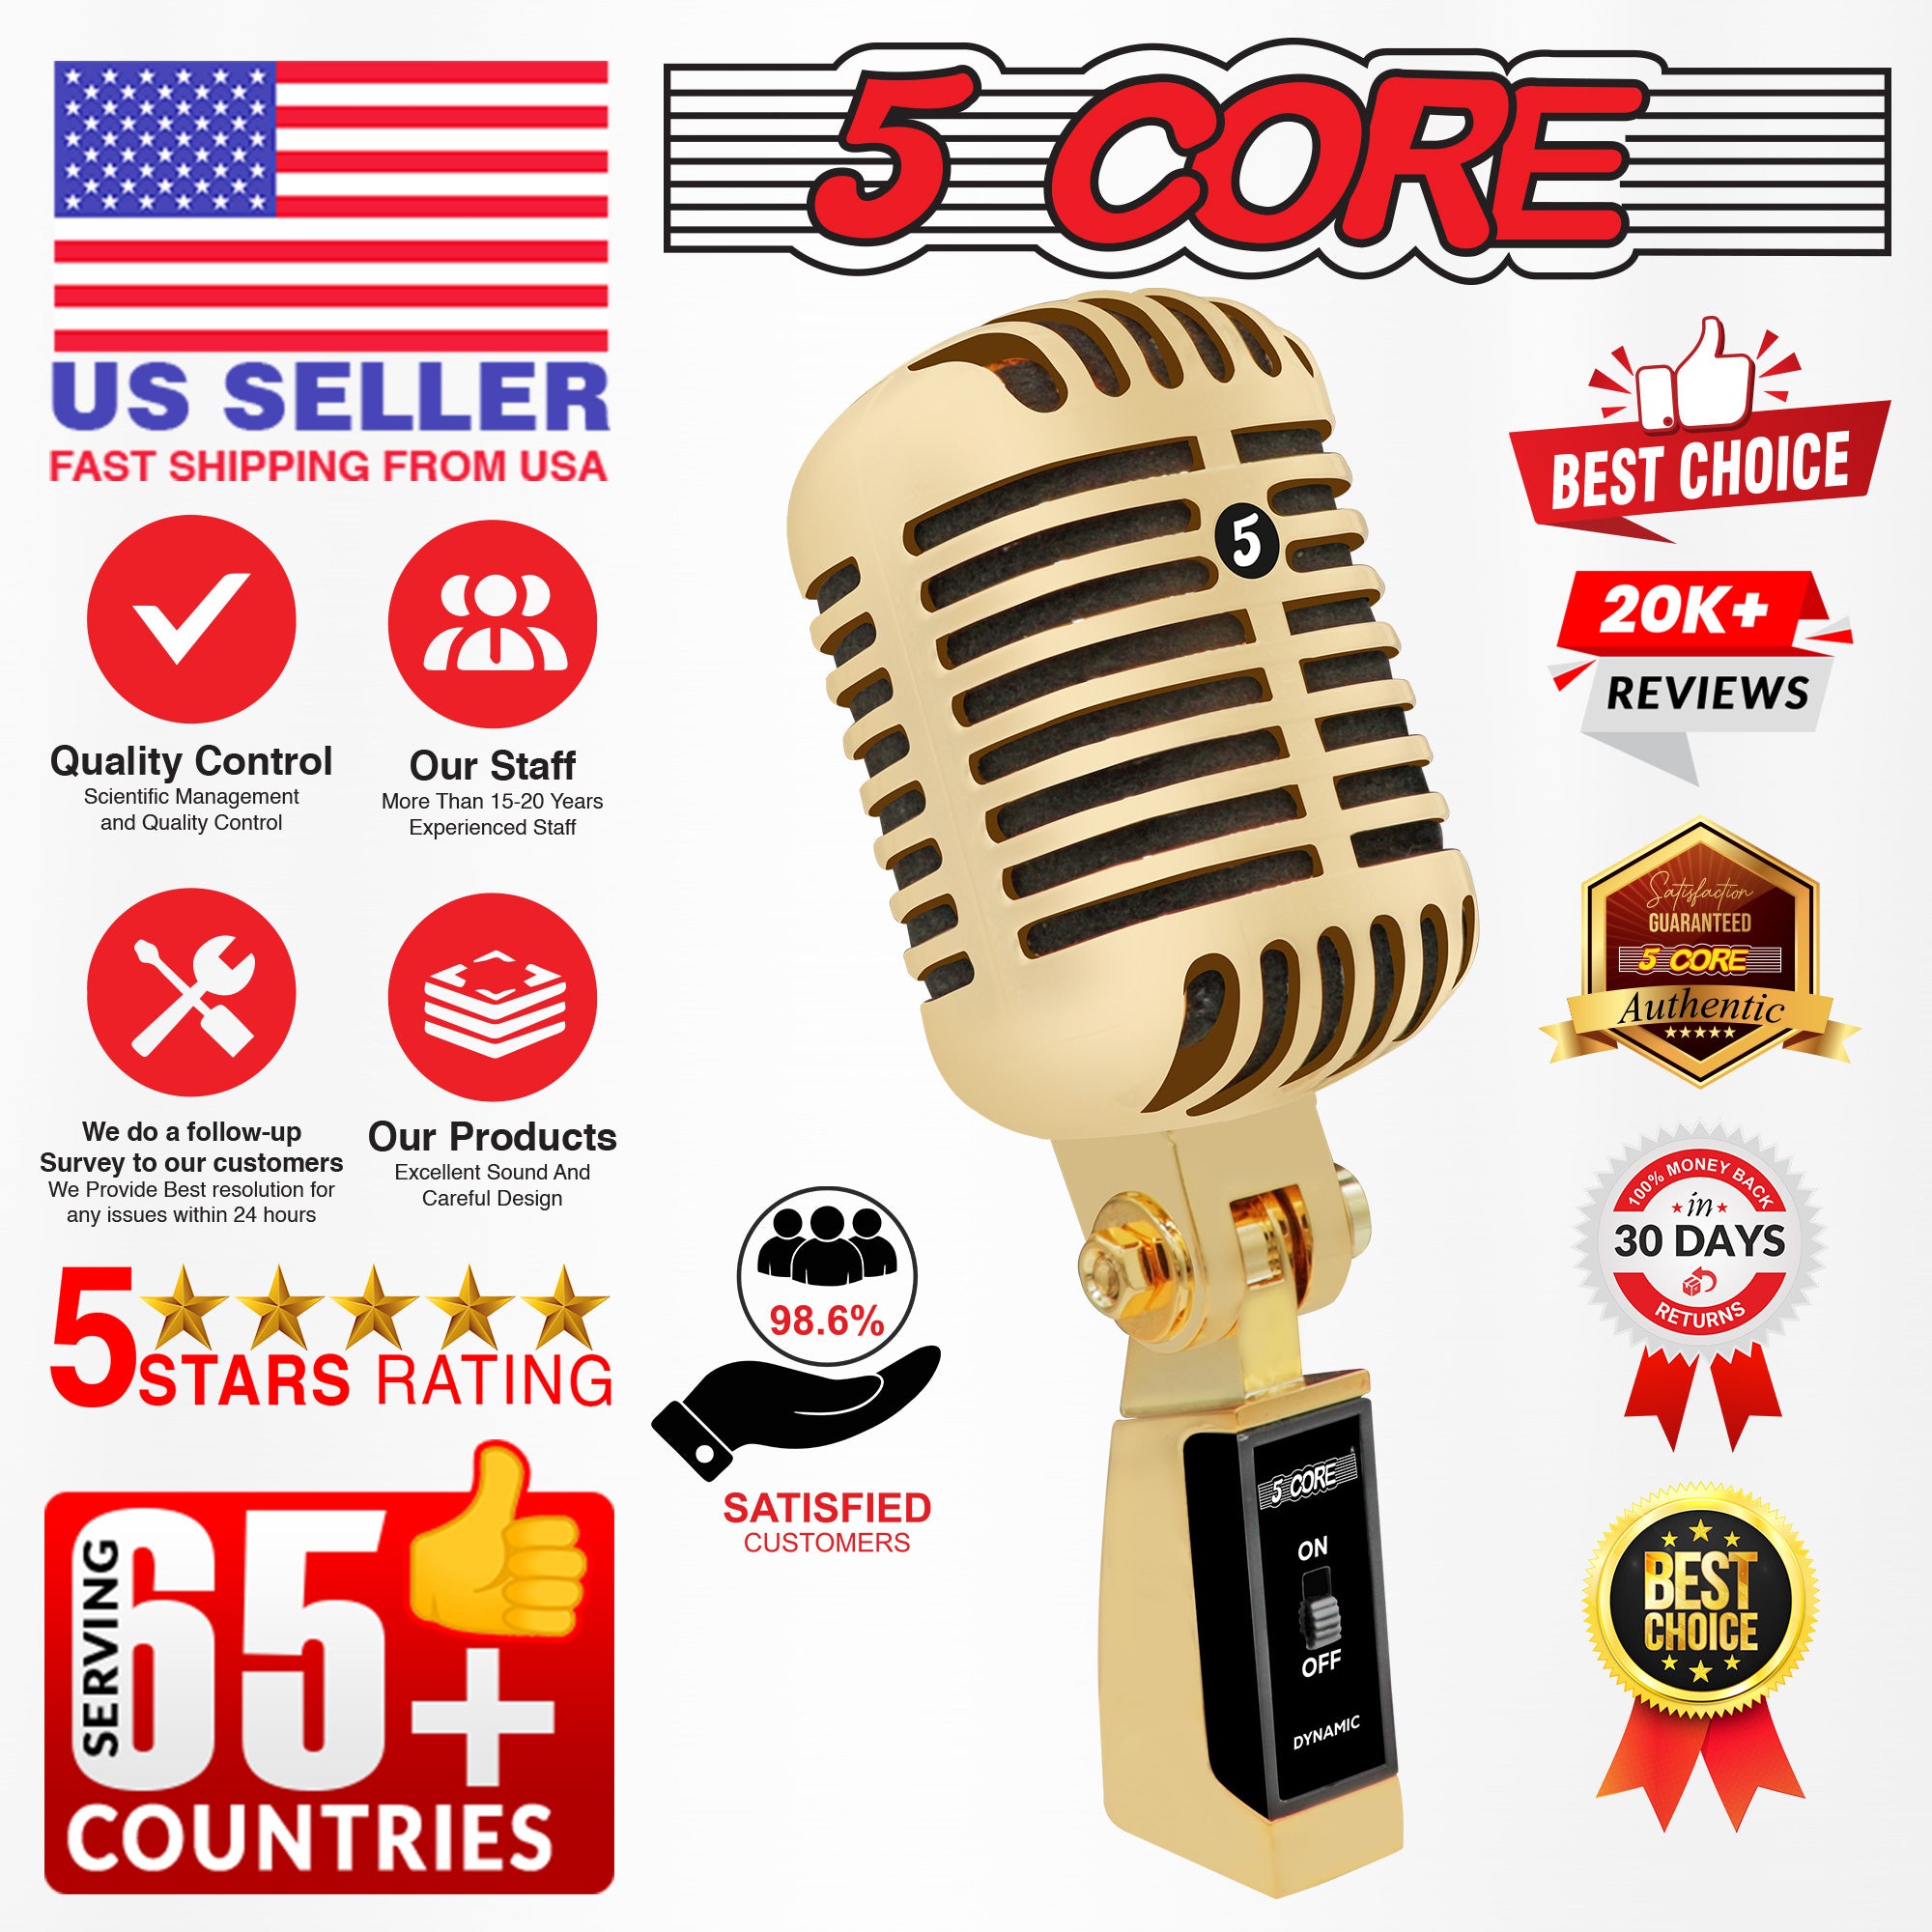 5 Core Classic Retro Microphone Electret Condenser Vocal Rich Iconic Gold Vintage Style Metal Unidirectional Super Cardioid 48V Phantom Mic w Pop Filter for Studio Recording Live Gigs -RTRO MIC GLD